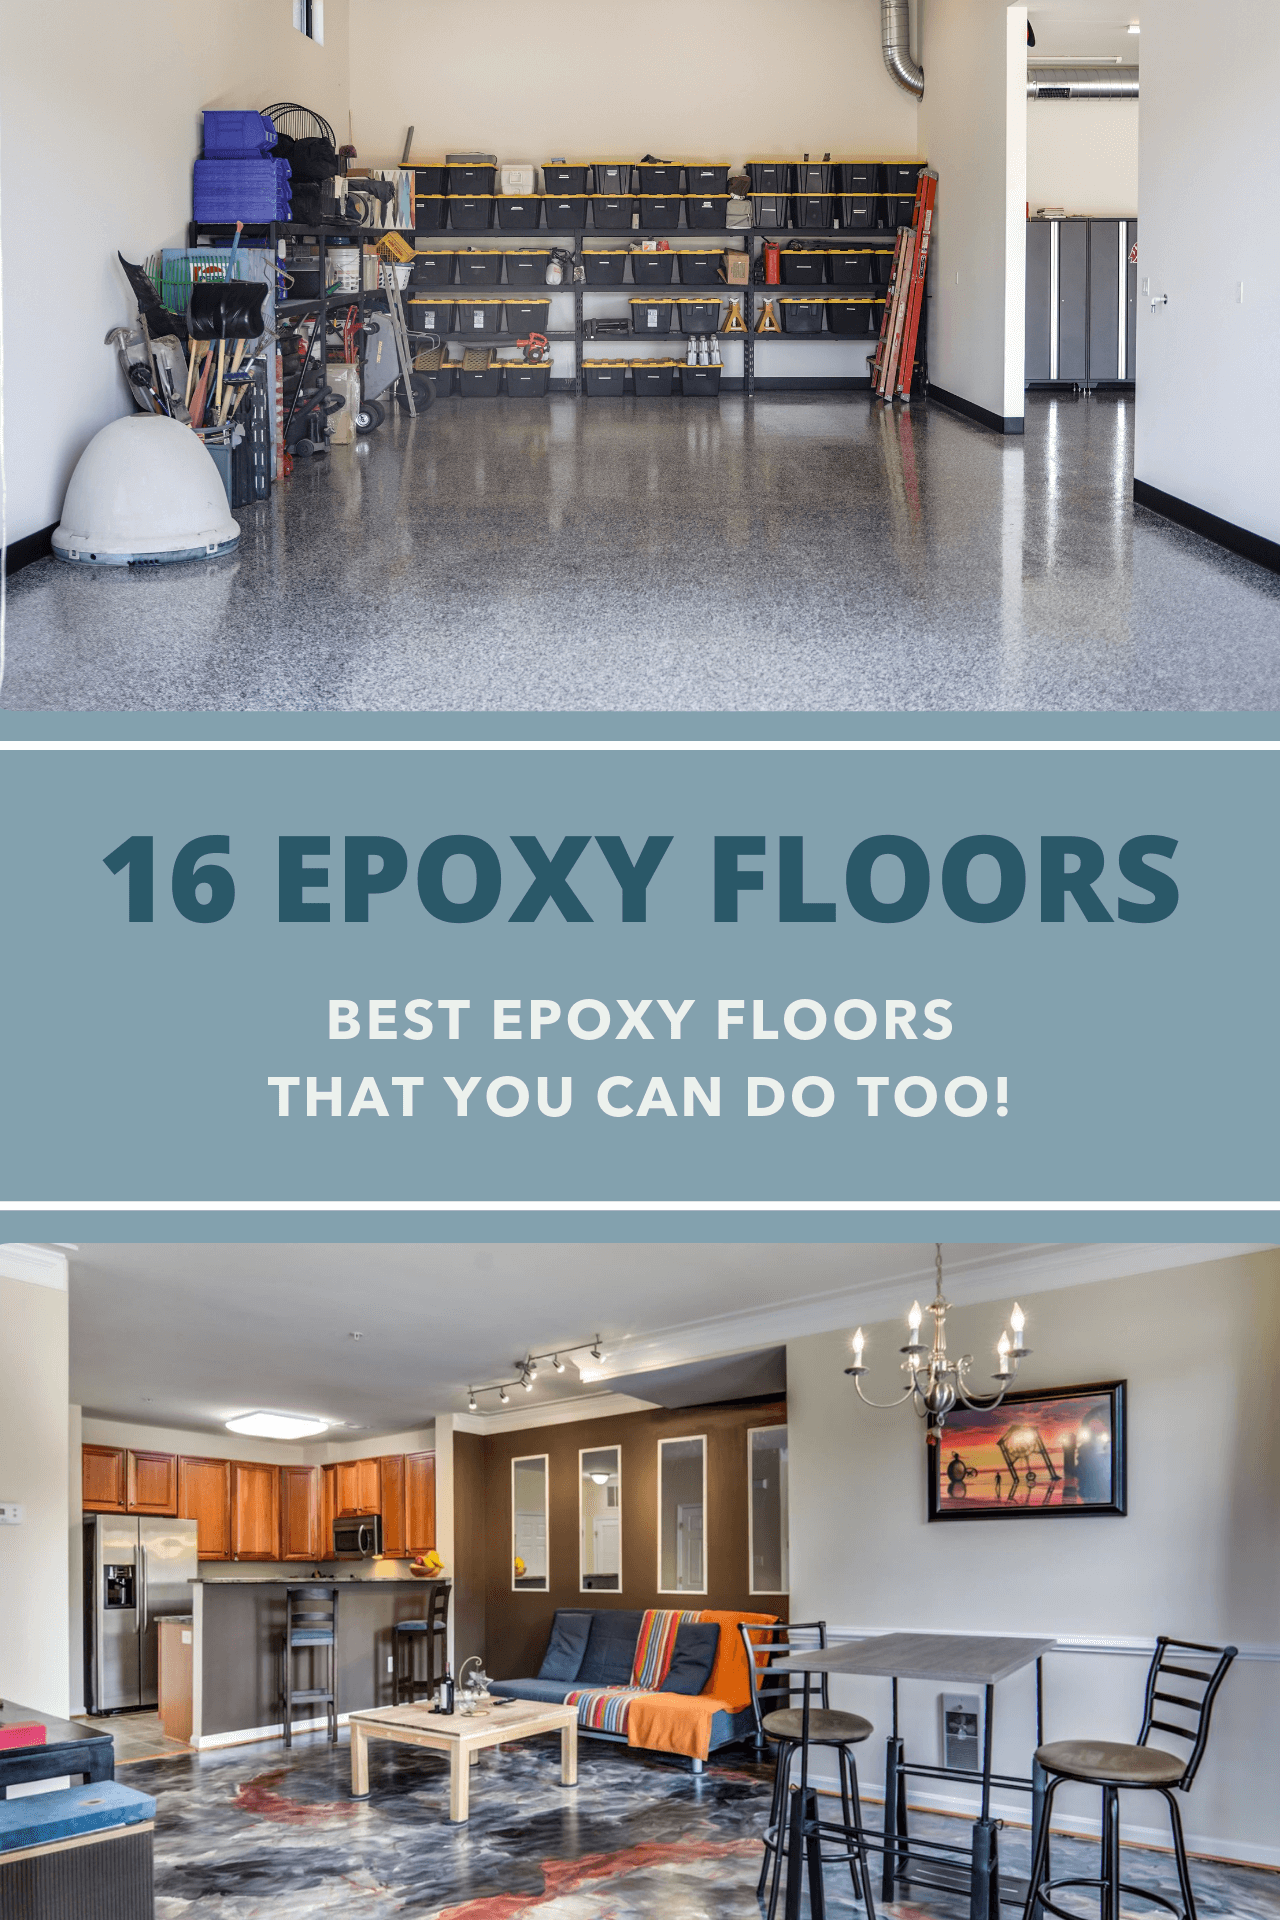 16 Epoxy Floors - Best Epoxy Floors That You Can Do Too. Featured image with a flake epoxy garage floor and an indoor space with an amazing epoxy floor